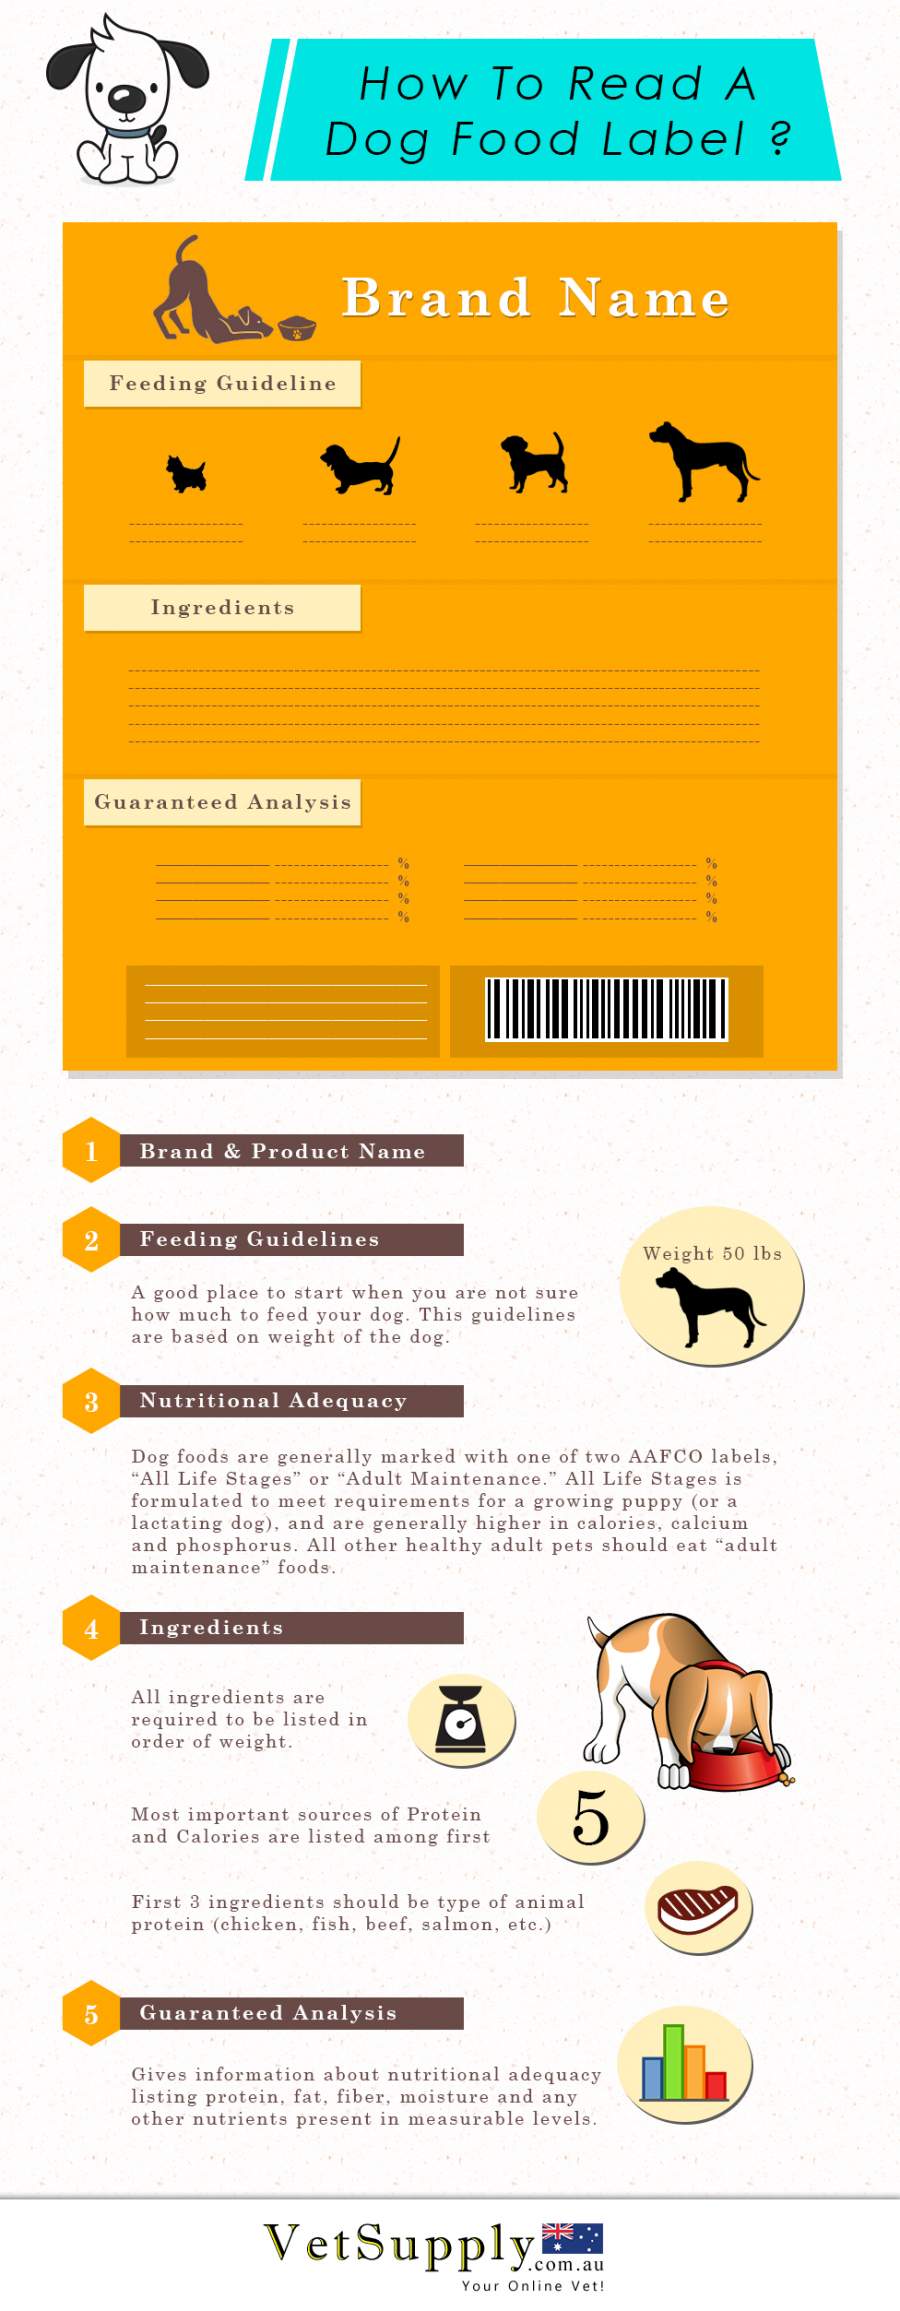 How to Read A Dog Food Label